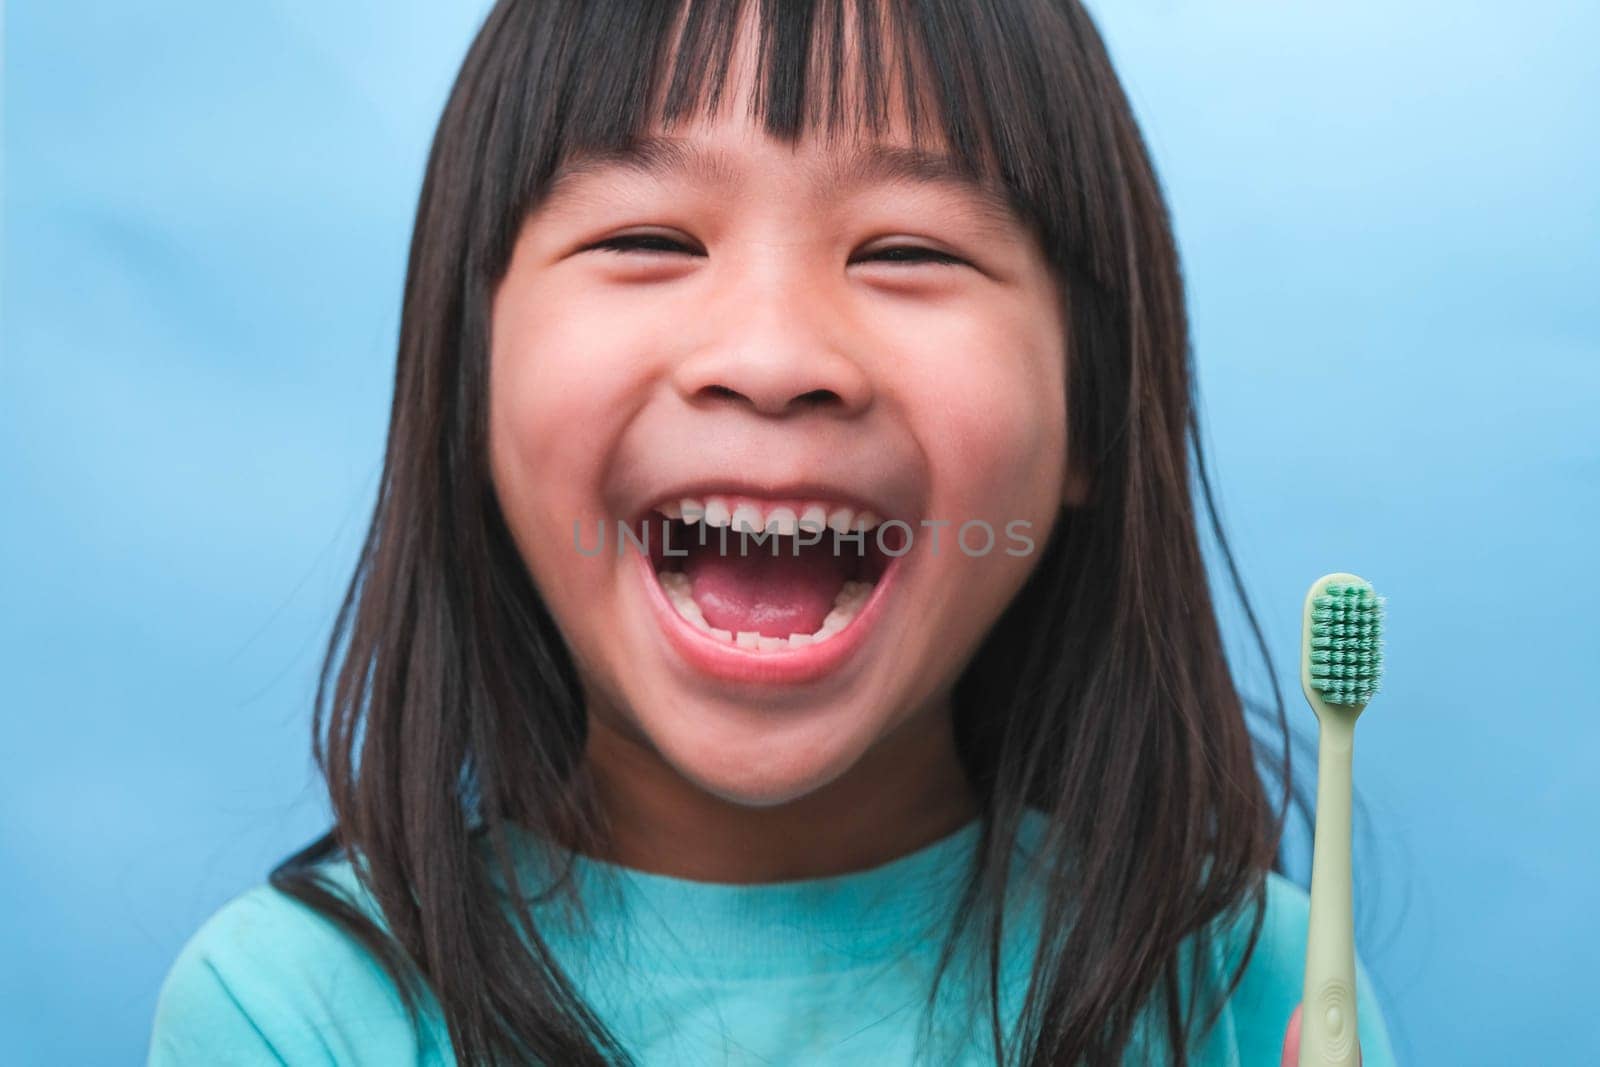 Smiling cute little girl holding toothbrush isolated on blue background. Cute little child brushing teeth. Kid training oral hygiene, Tooth decay prevention or dental care concept. by TEERASAK